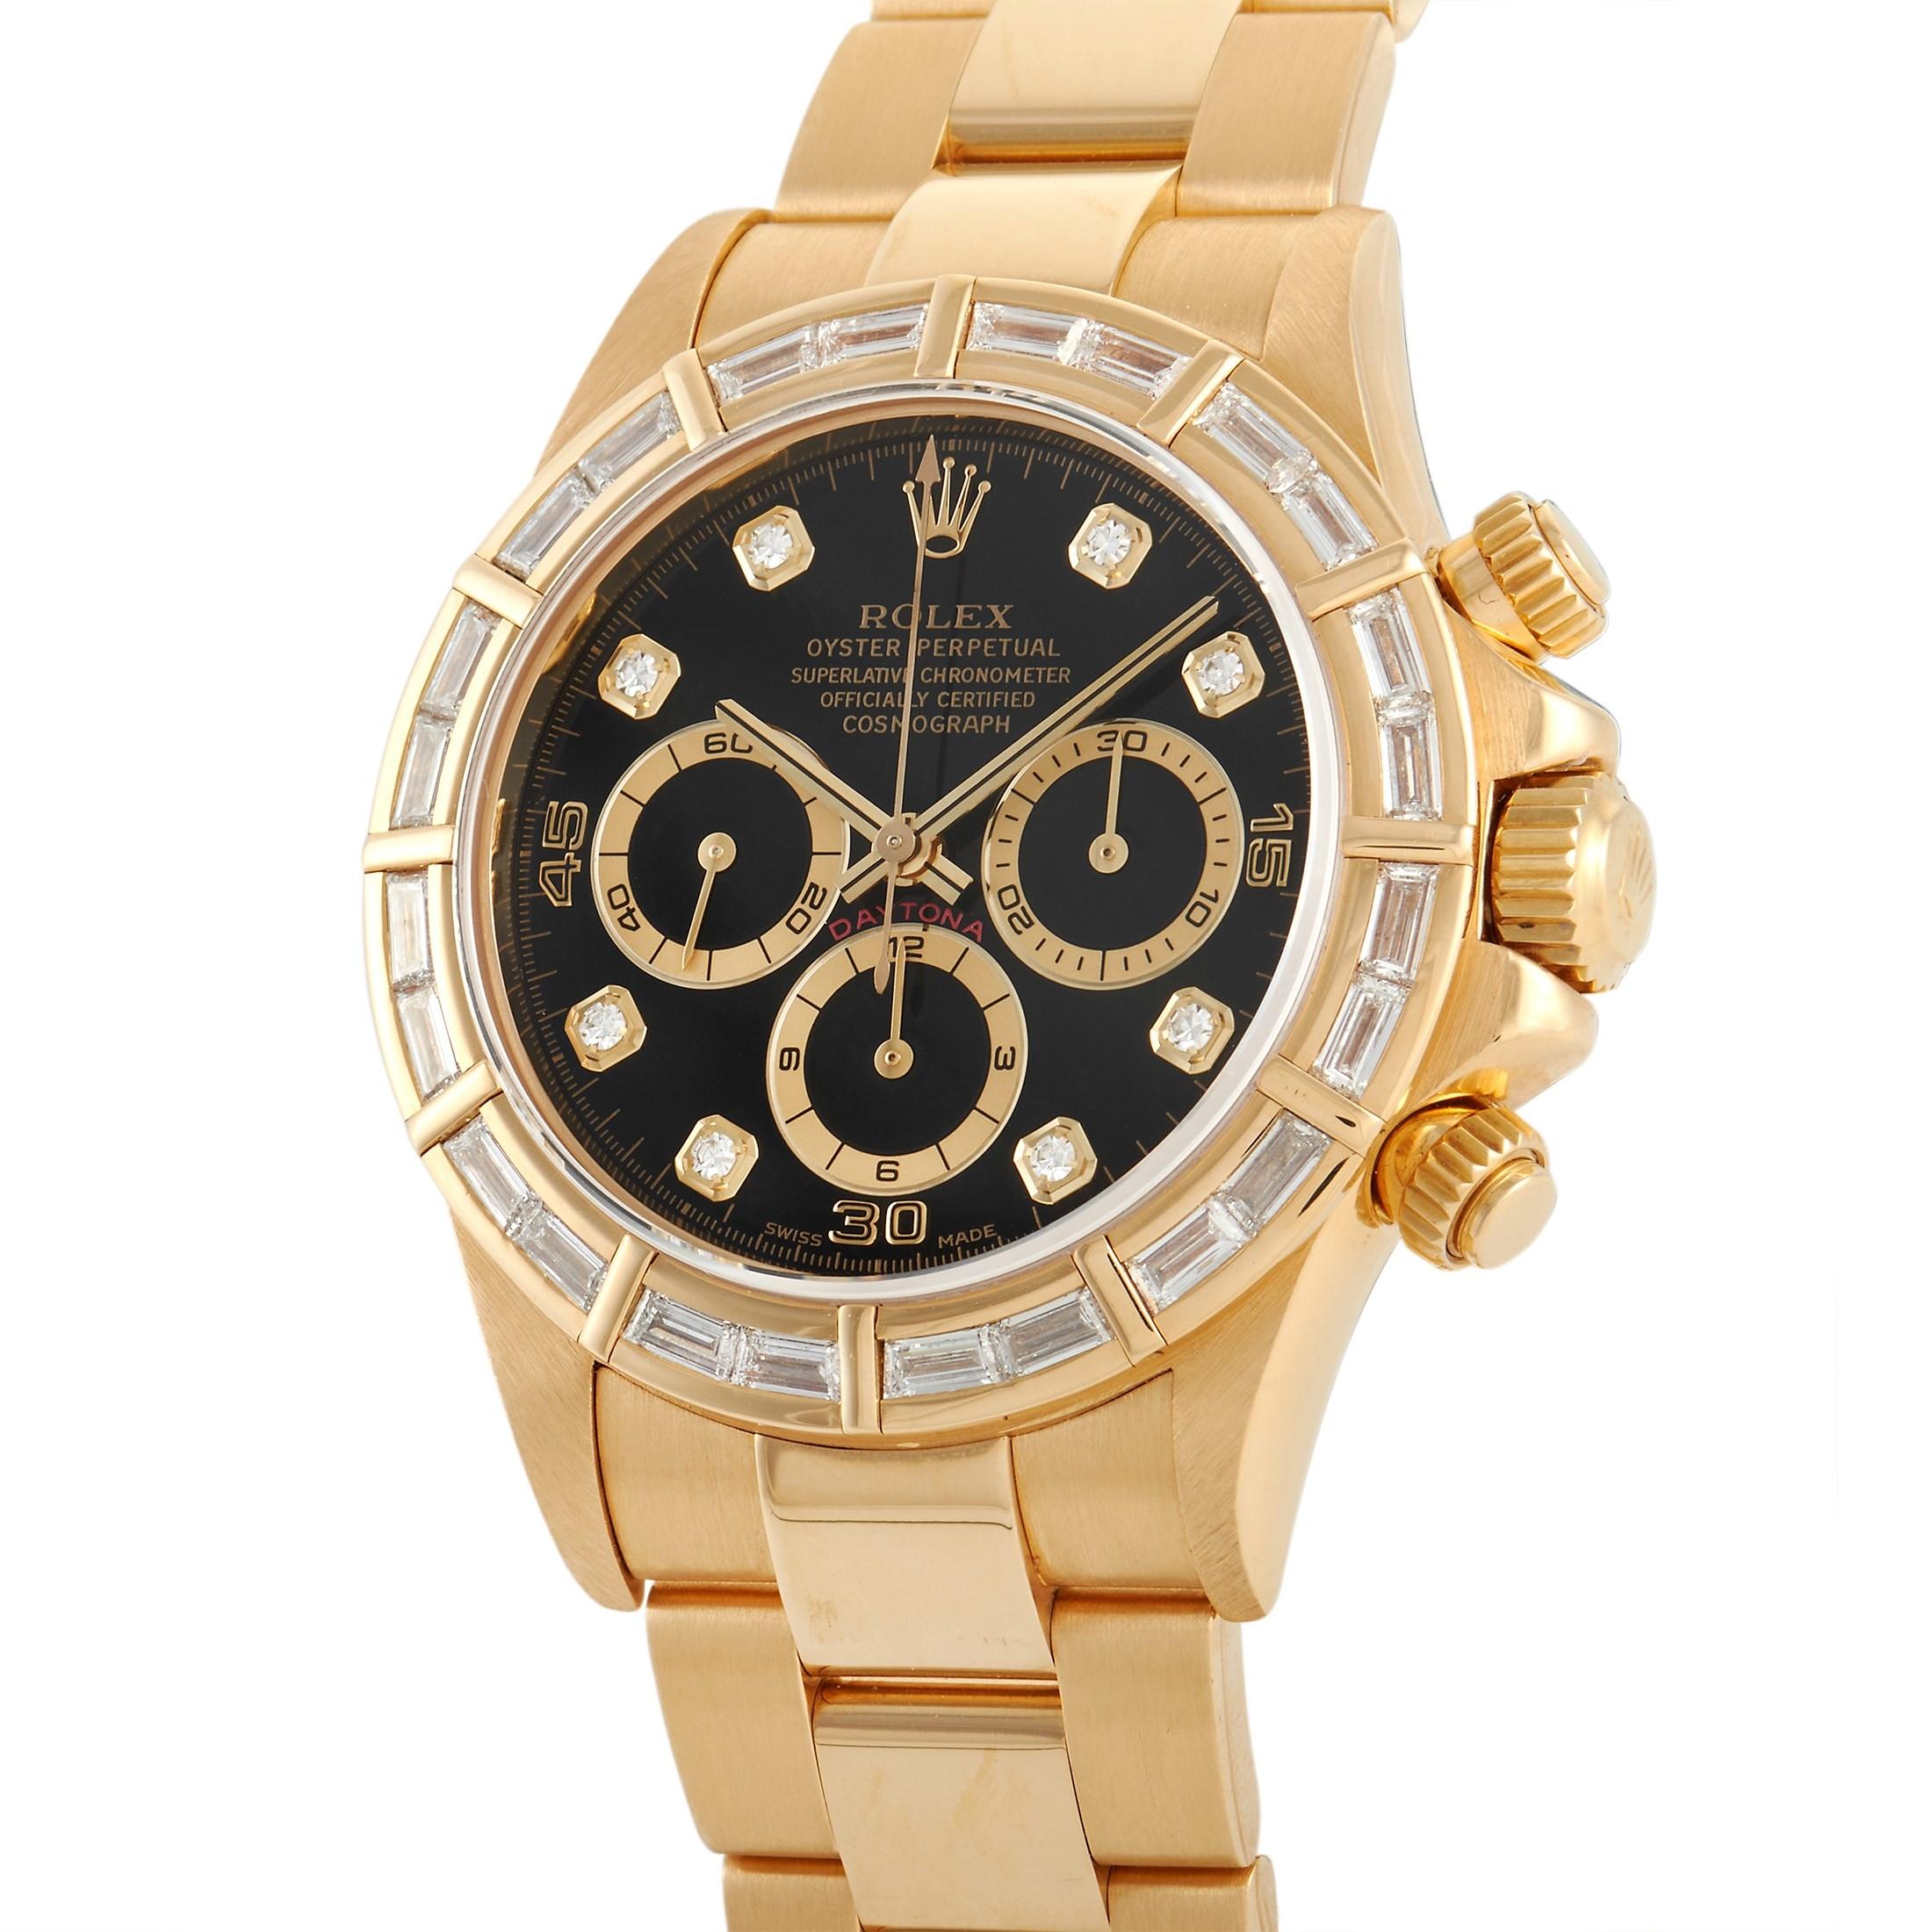 The Rolex Daytona Diamond Set Watch, reference number 16568, is a luxury timepiece that is sure to turn heads. 

Opulent 18K yellow gold on the 40mm case and bracelet set this piece apart, but it’s the 24 diamond baguettes accenting the bezel that